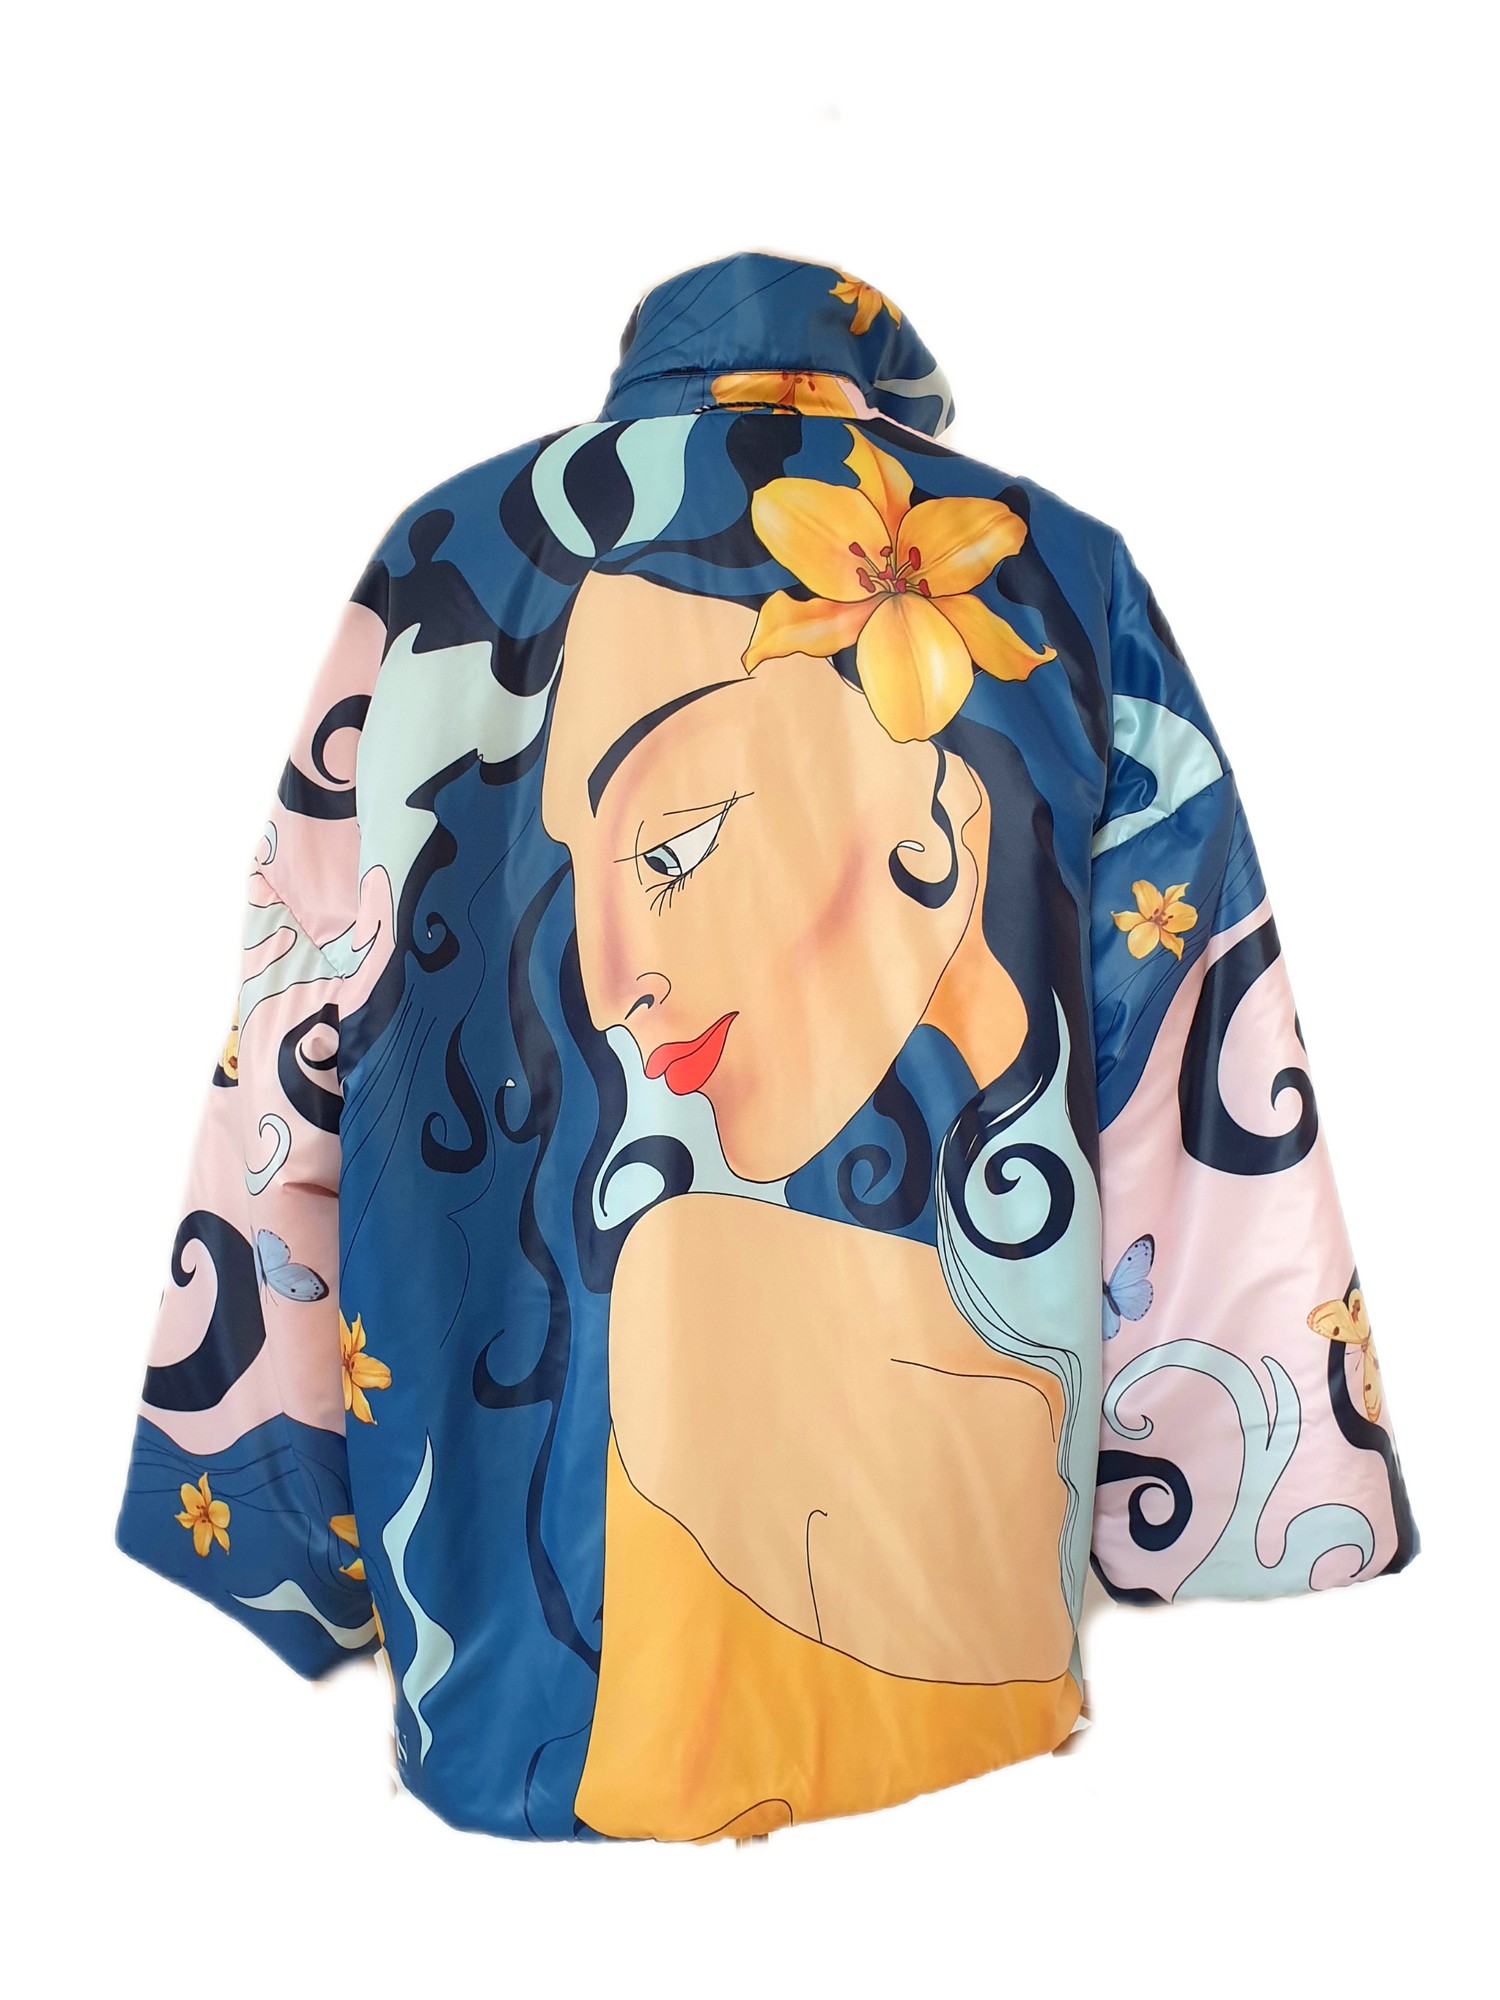 Reversible jacket "Girl with hair" Y E V A